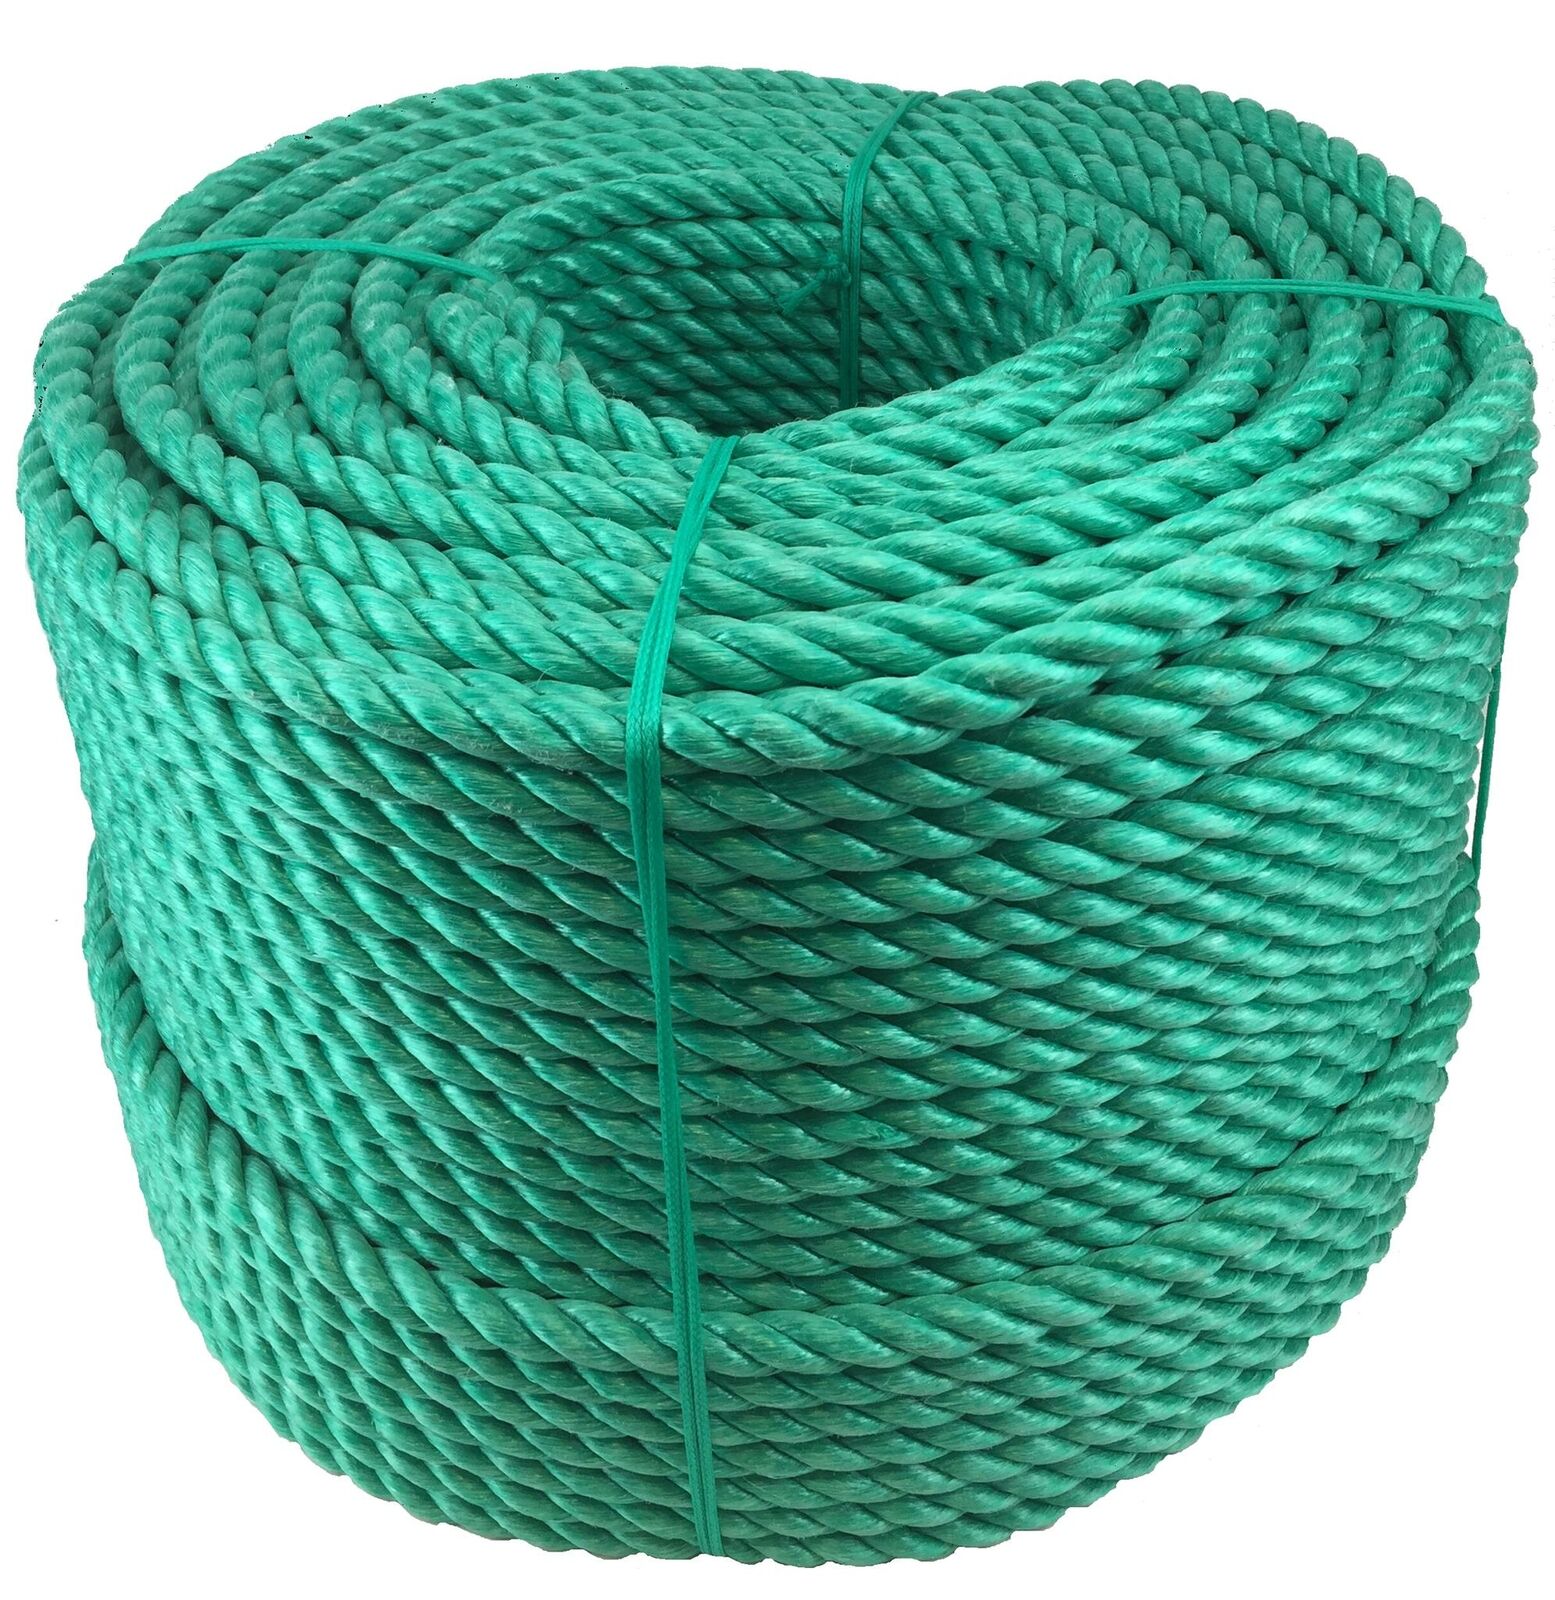 20mm Green Polypropylene Rope x 20 Metres, Cheap Nylon Rope, Poly Rope  Coils